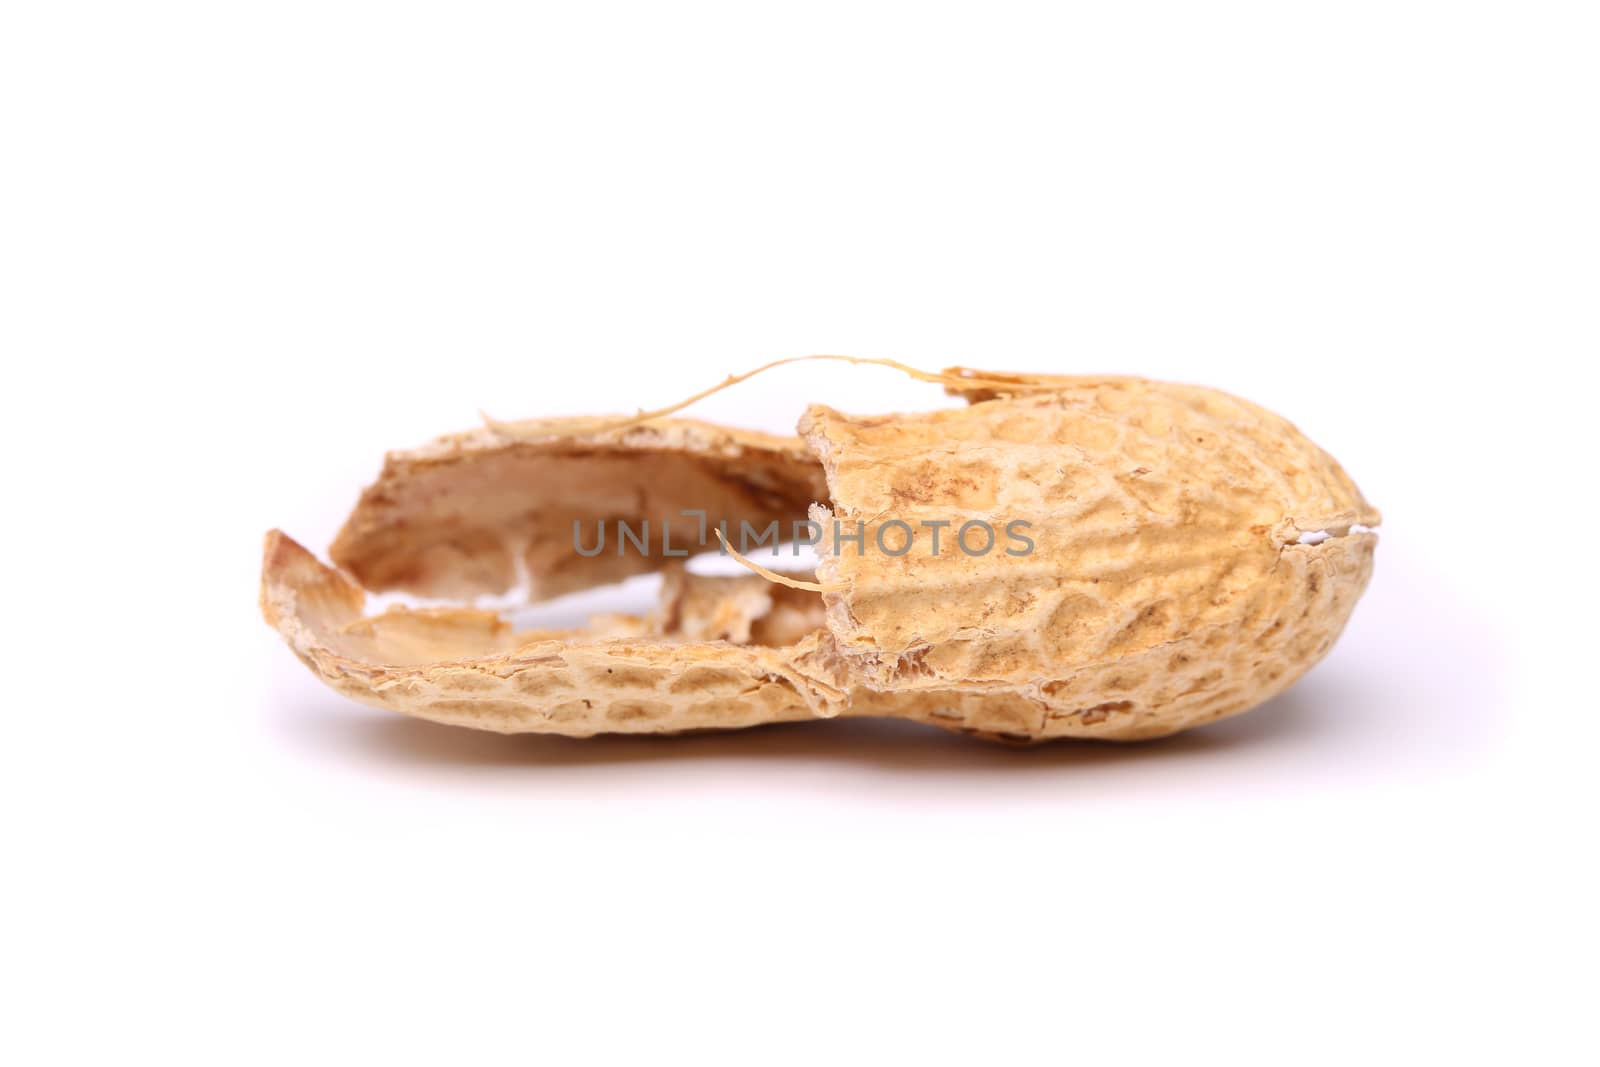 A peel of peanut close-up on the white background